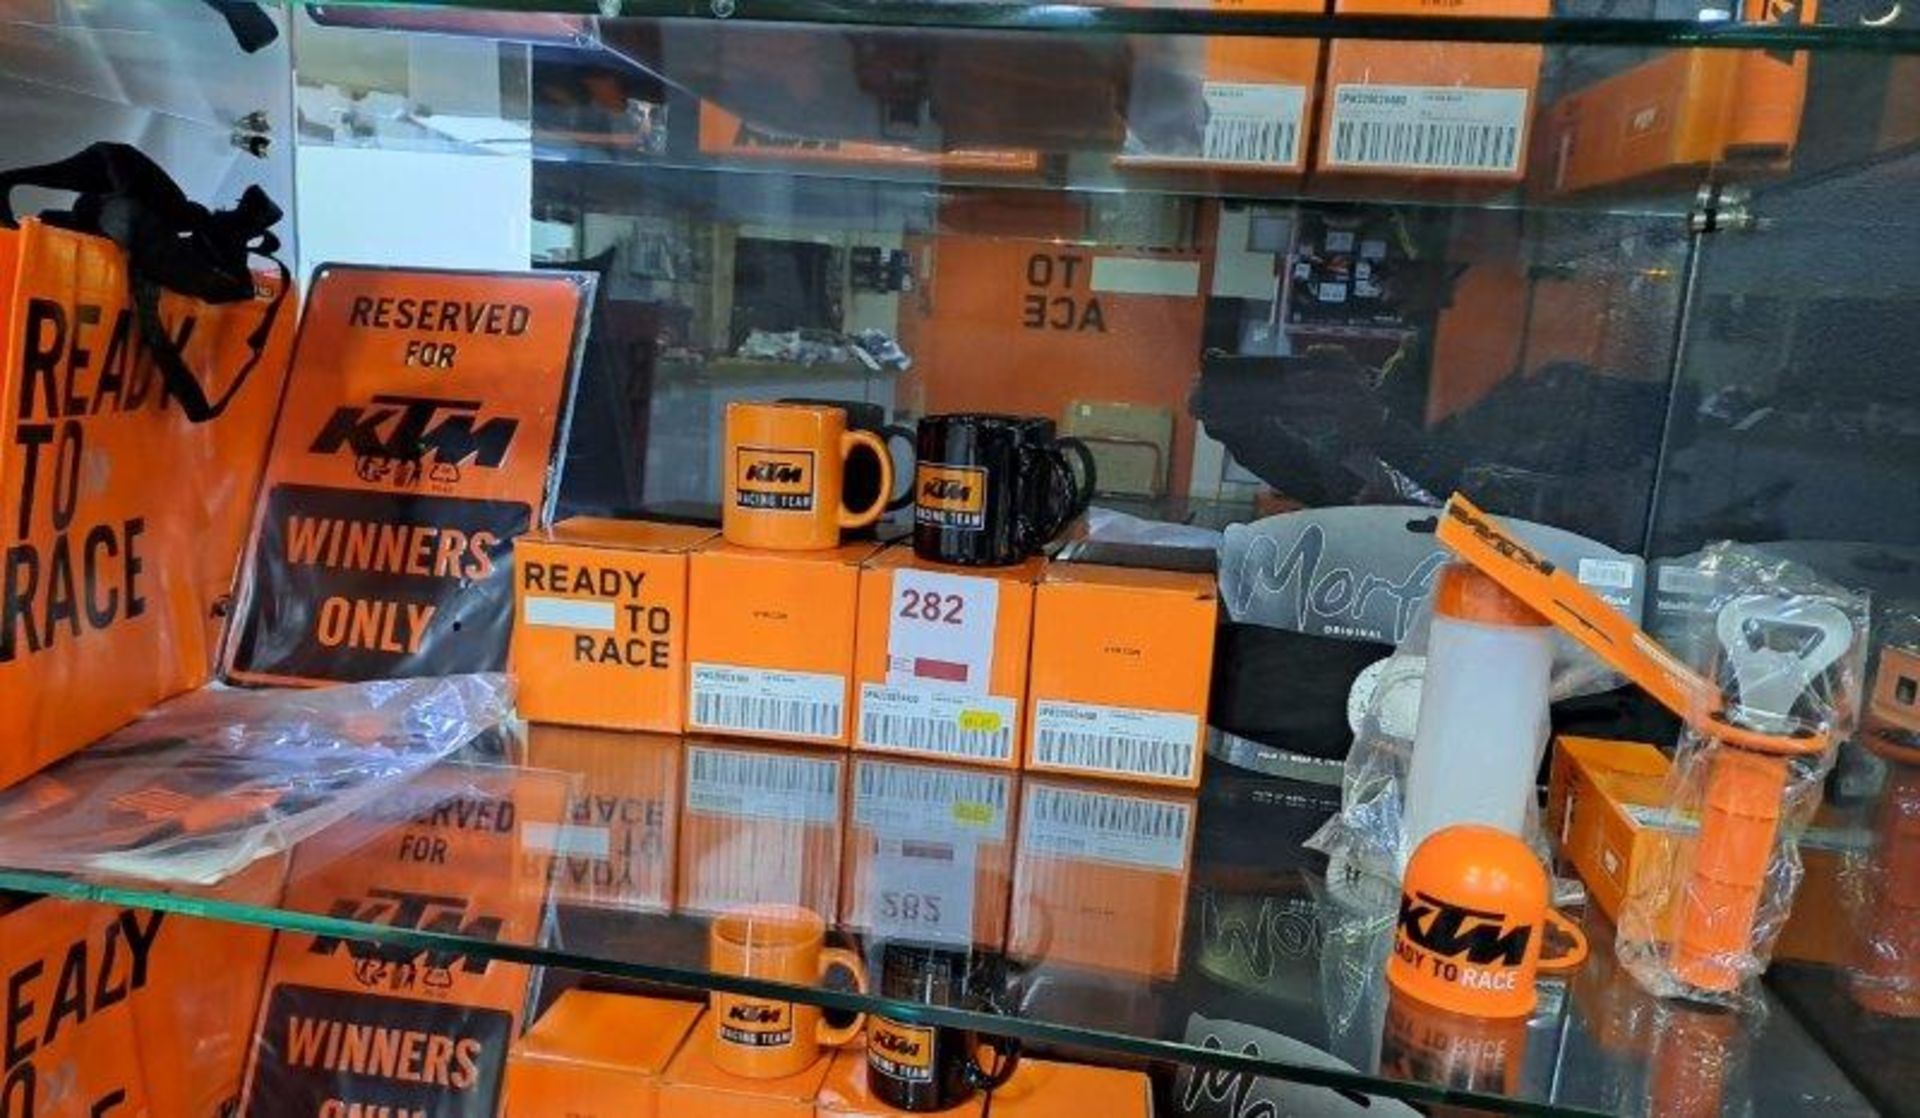 Contents of shelf of KTM Merchandise as pictured - Image 5 of 7